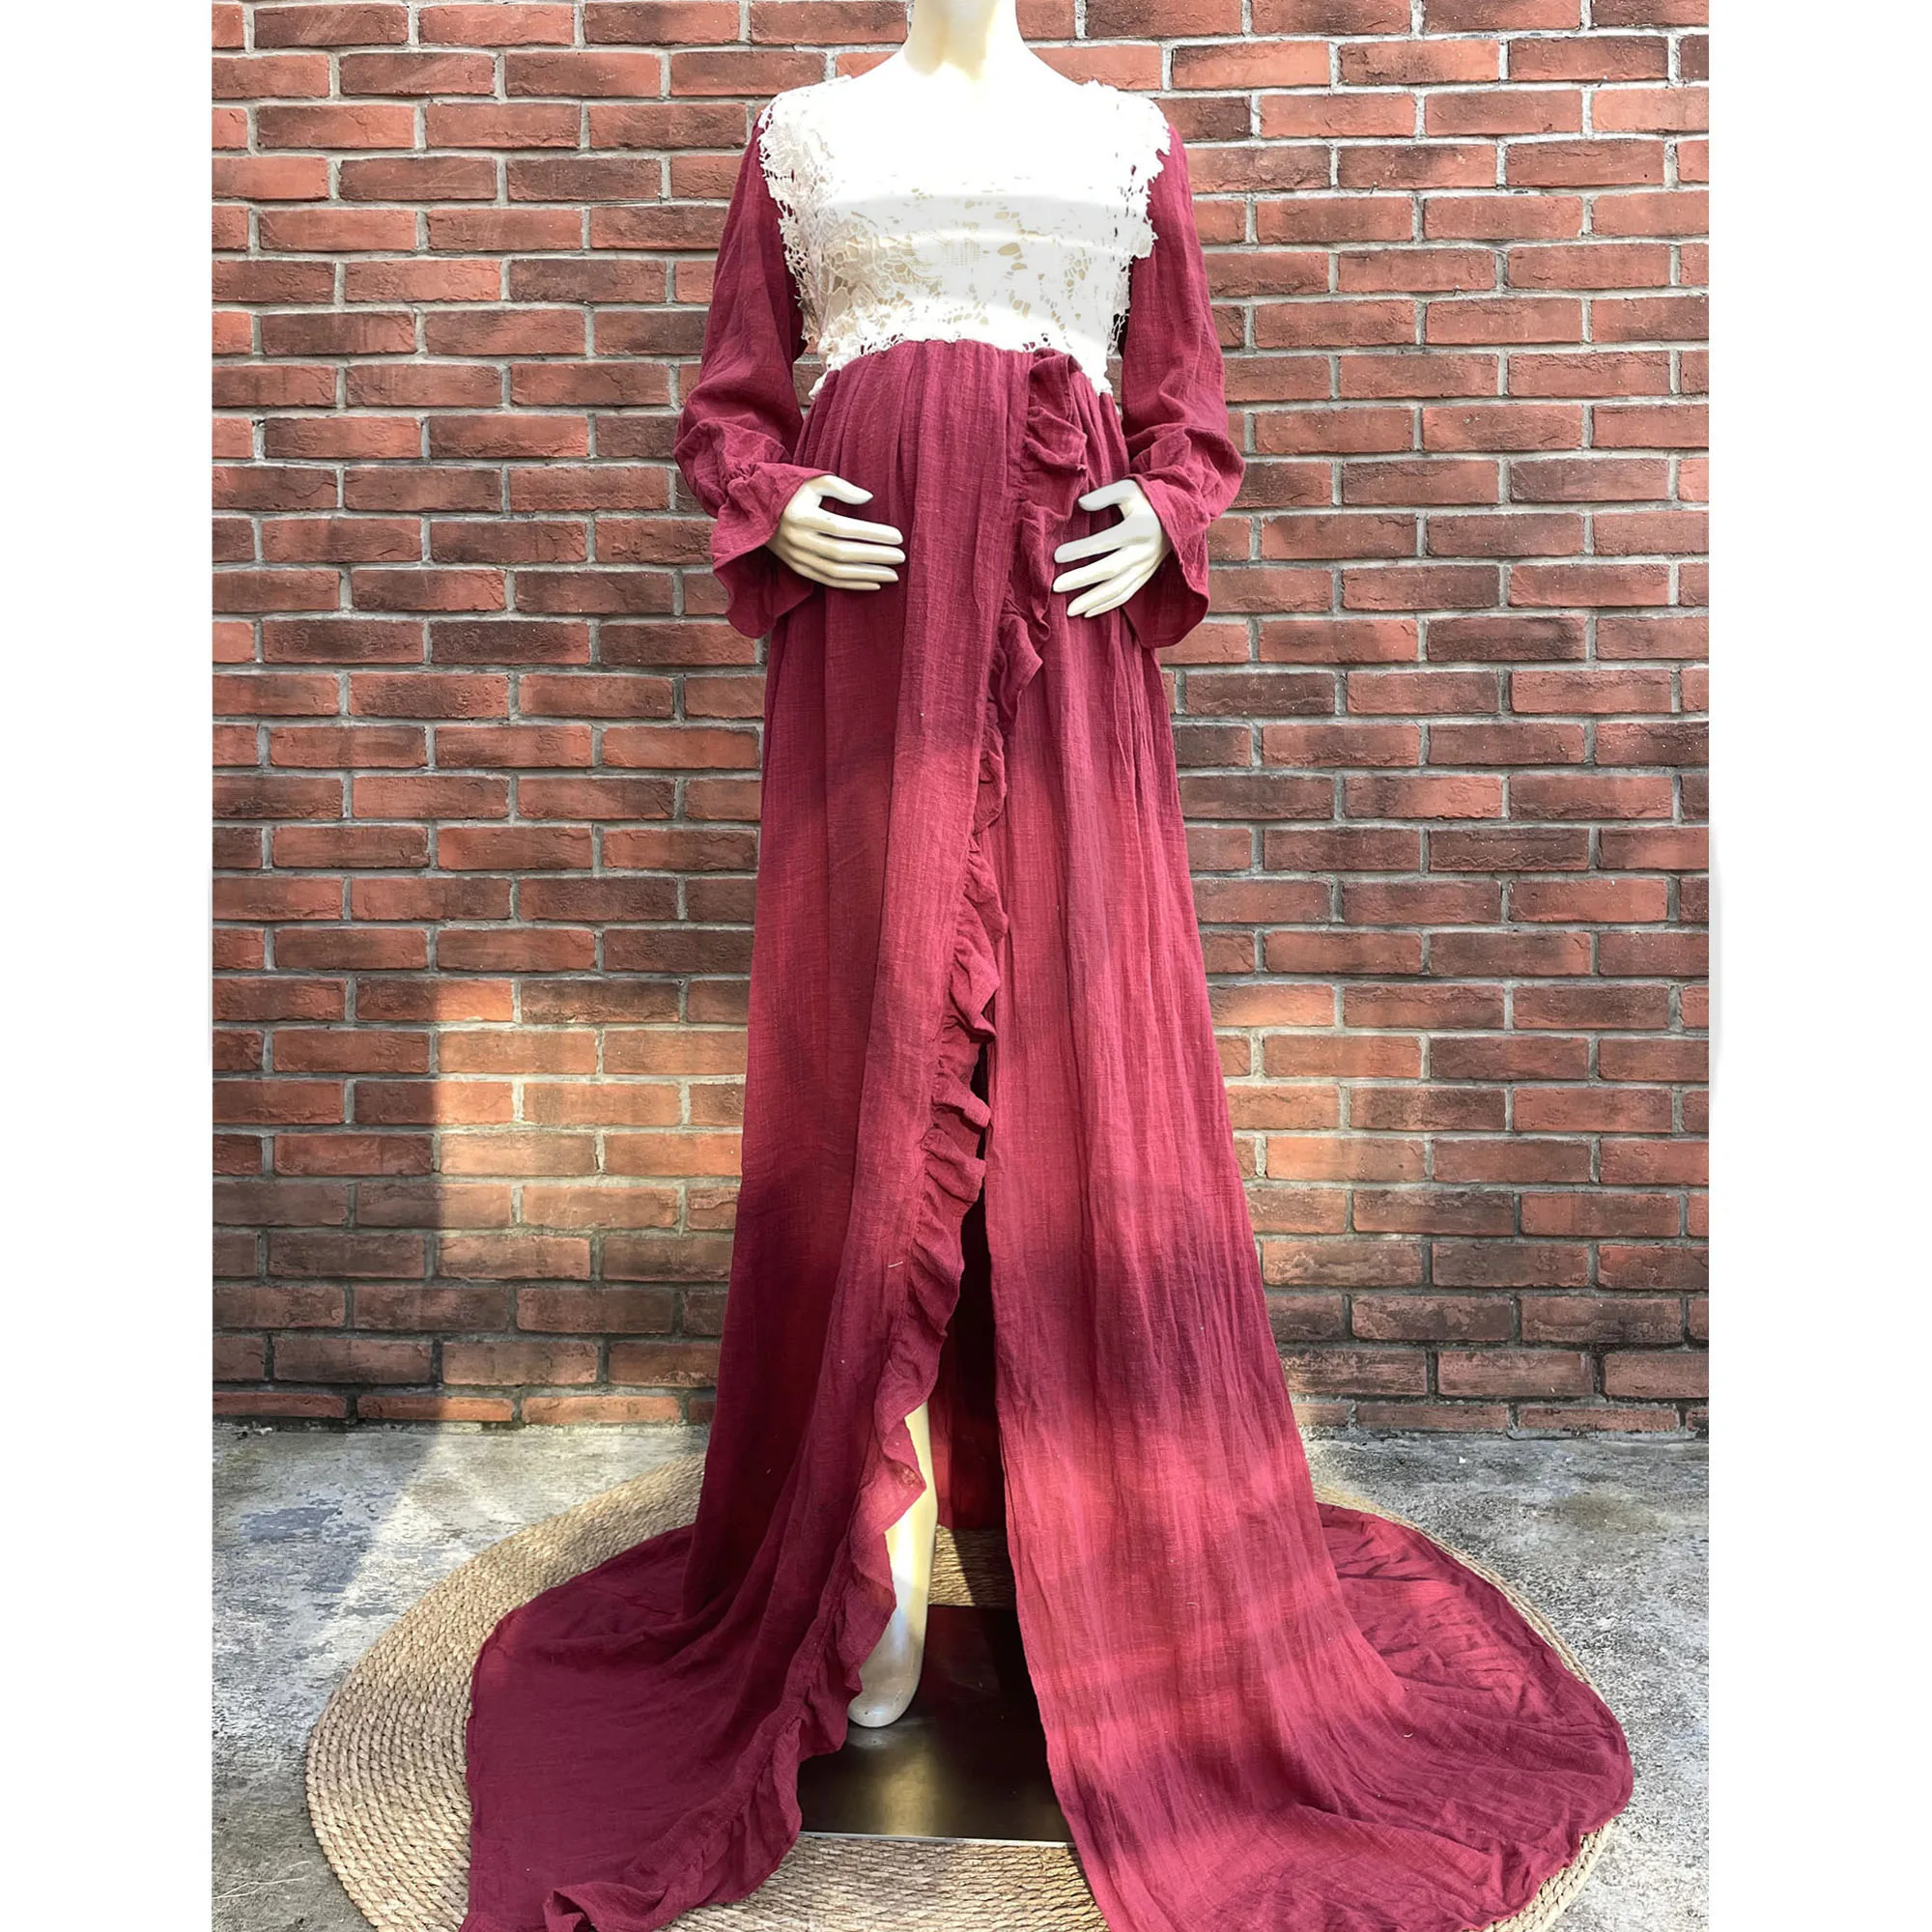 Front Split Cotton Kaftan Photo Shoot Full Sleeves Robe Maternity Dress Evening Party Costume for Women Photography Accessories enlarge